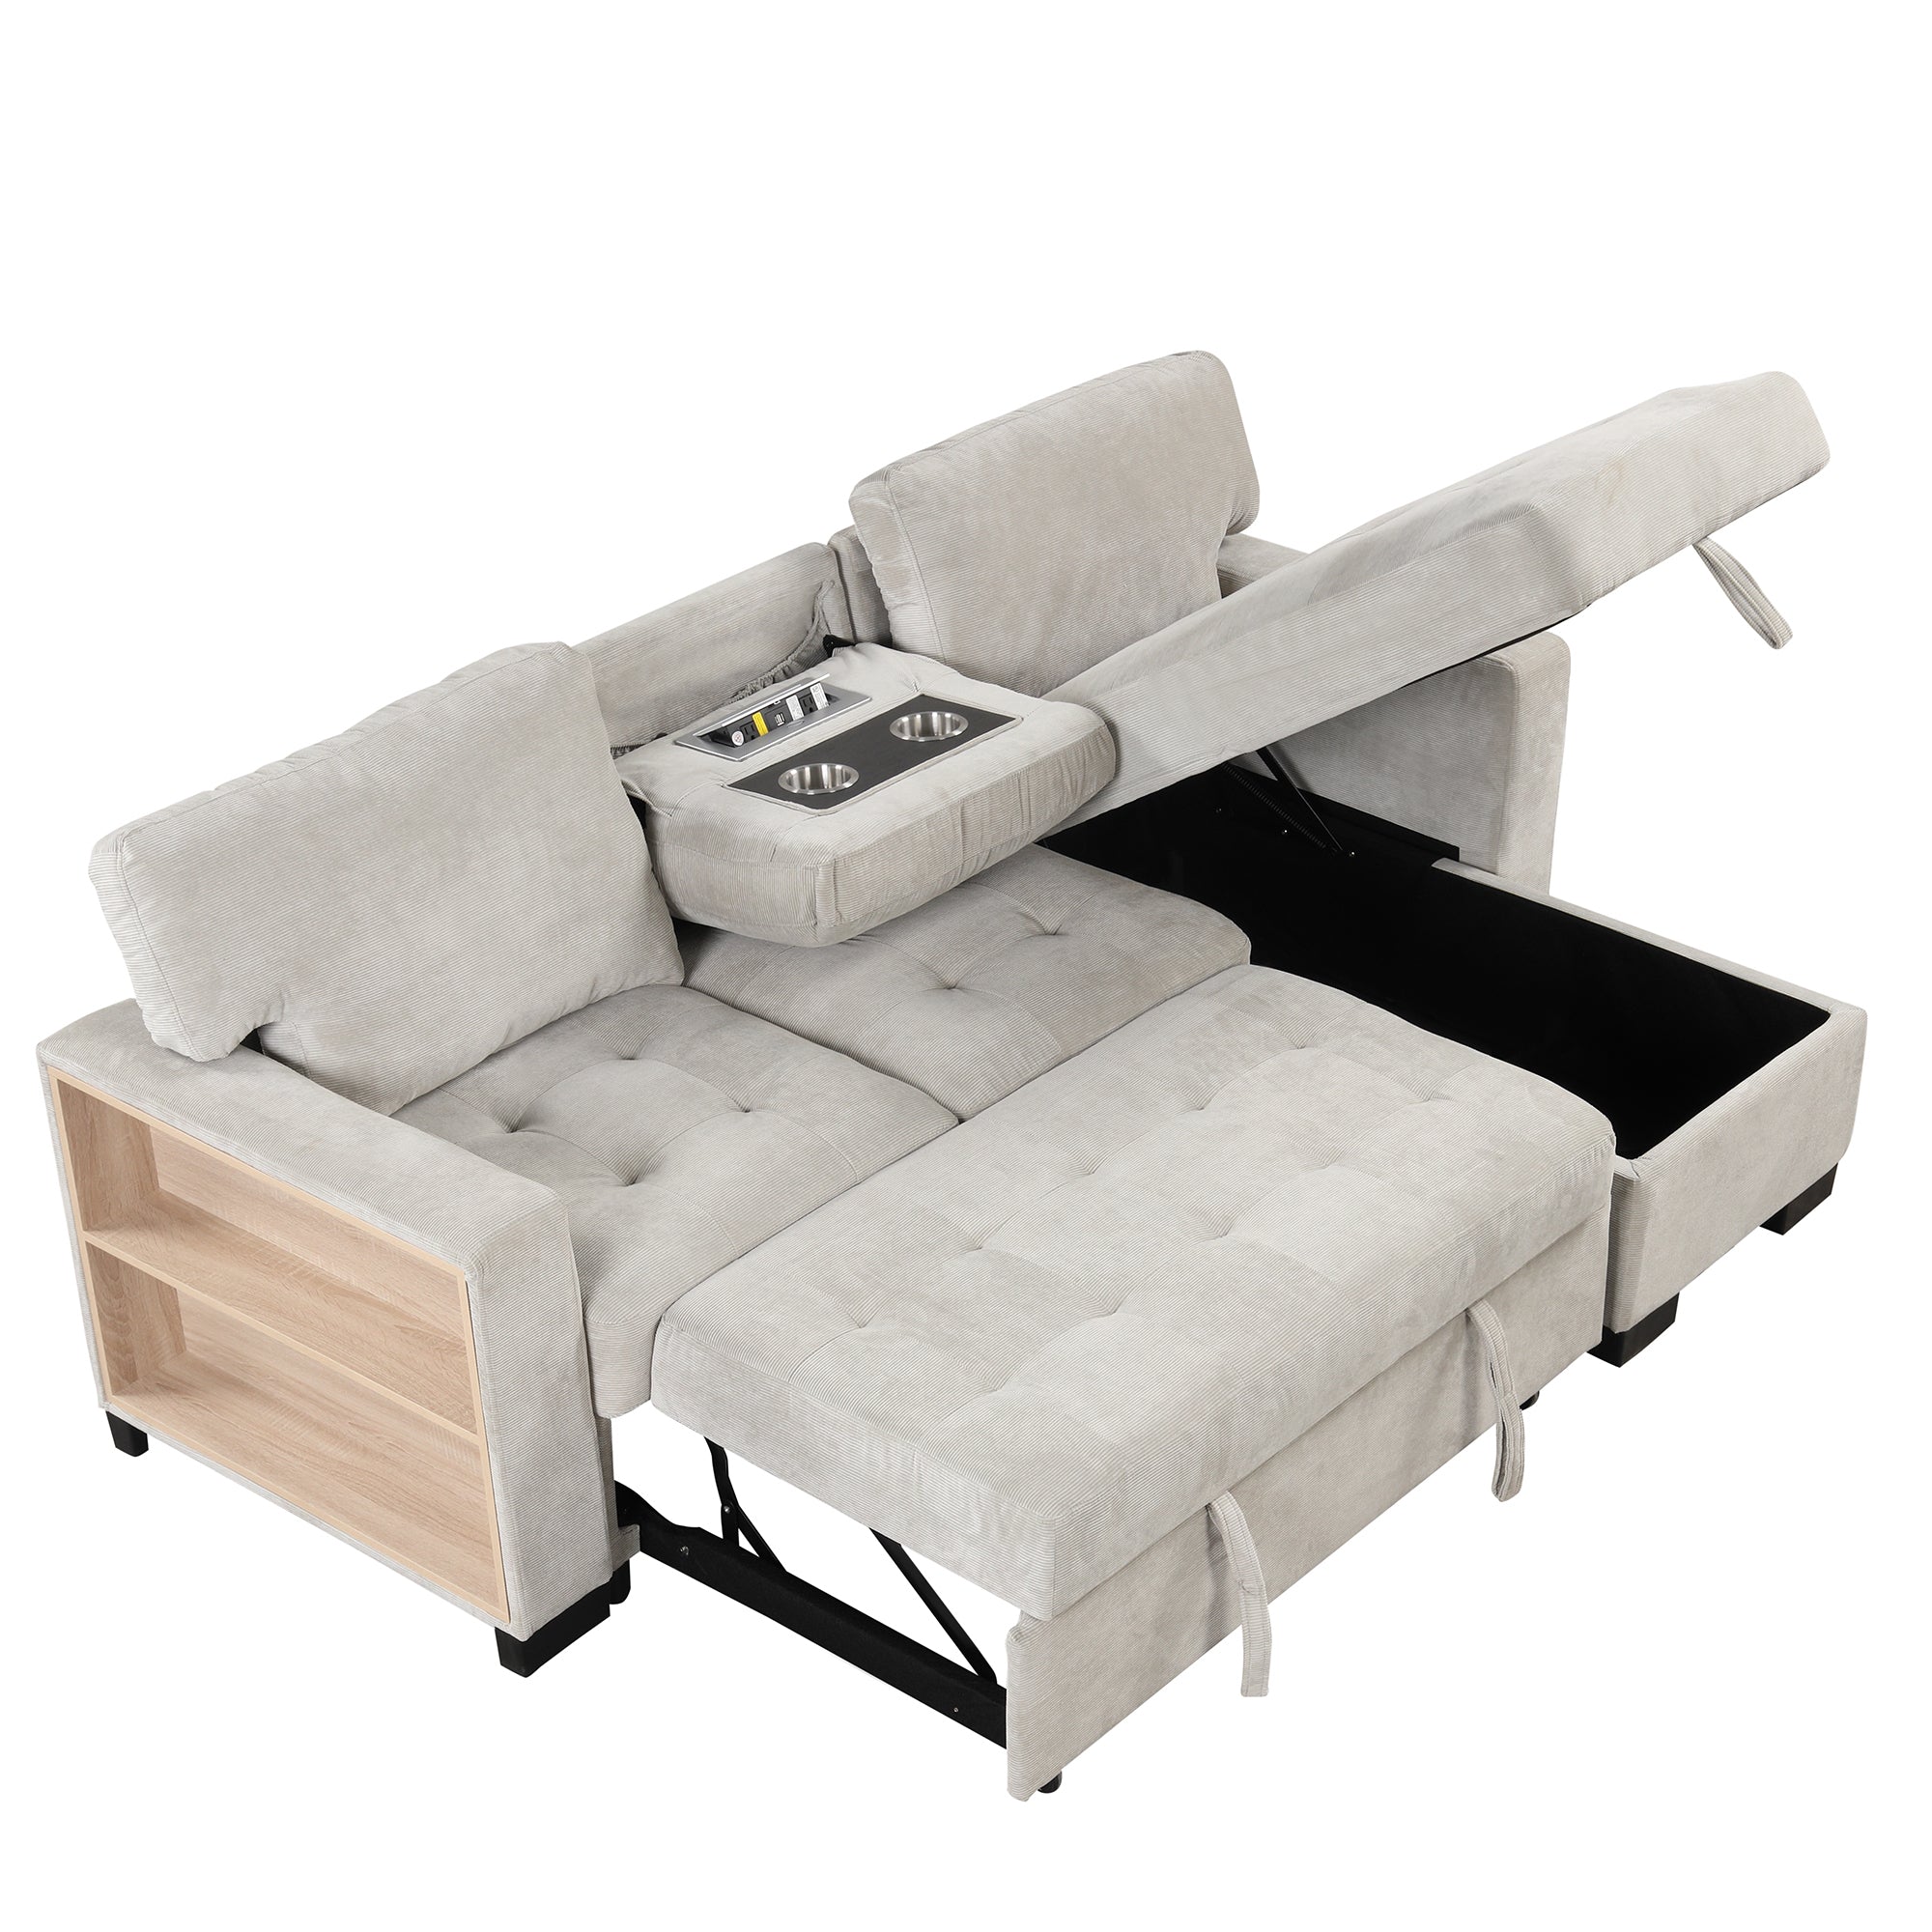 Stylish and Functional Light Chaise Lounge Sectional with Storage Rack, Pull-out Bed, Drop Down Table, and USB Charger | Light Gray | Ideal Addition to Your Living Space-Sleeper Sectionals-American Furniture Outlet